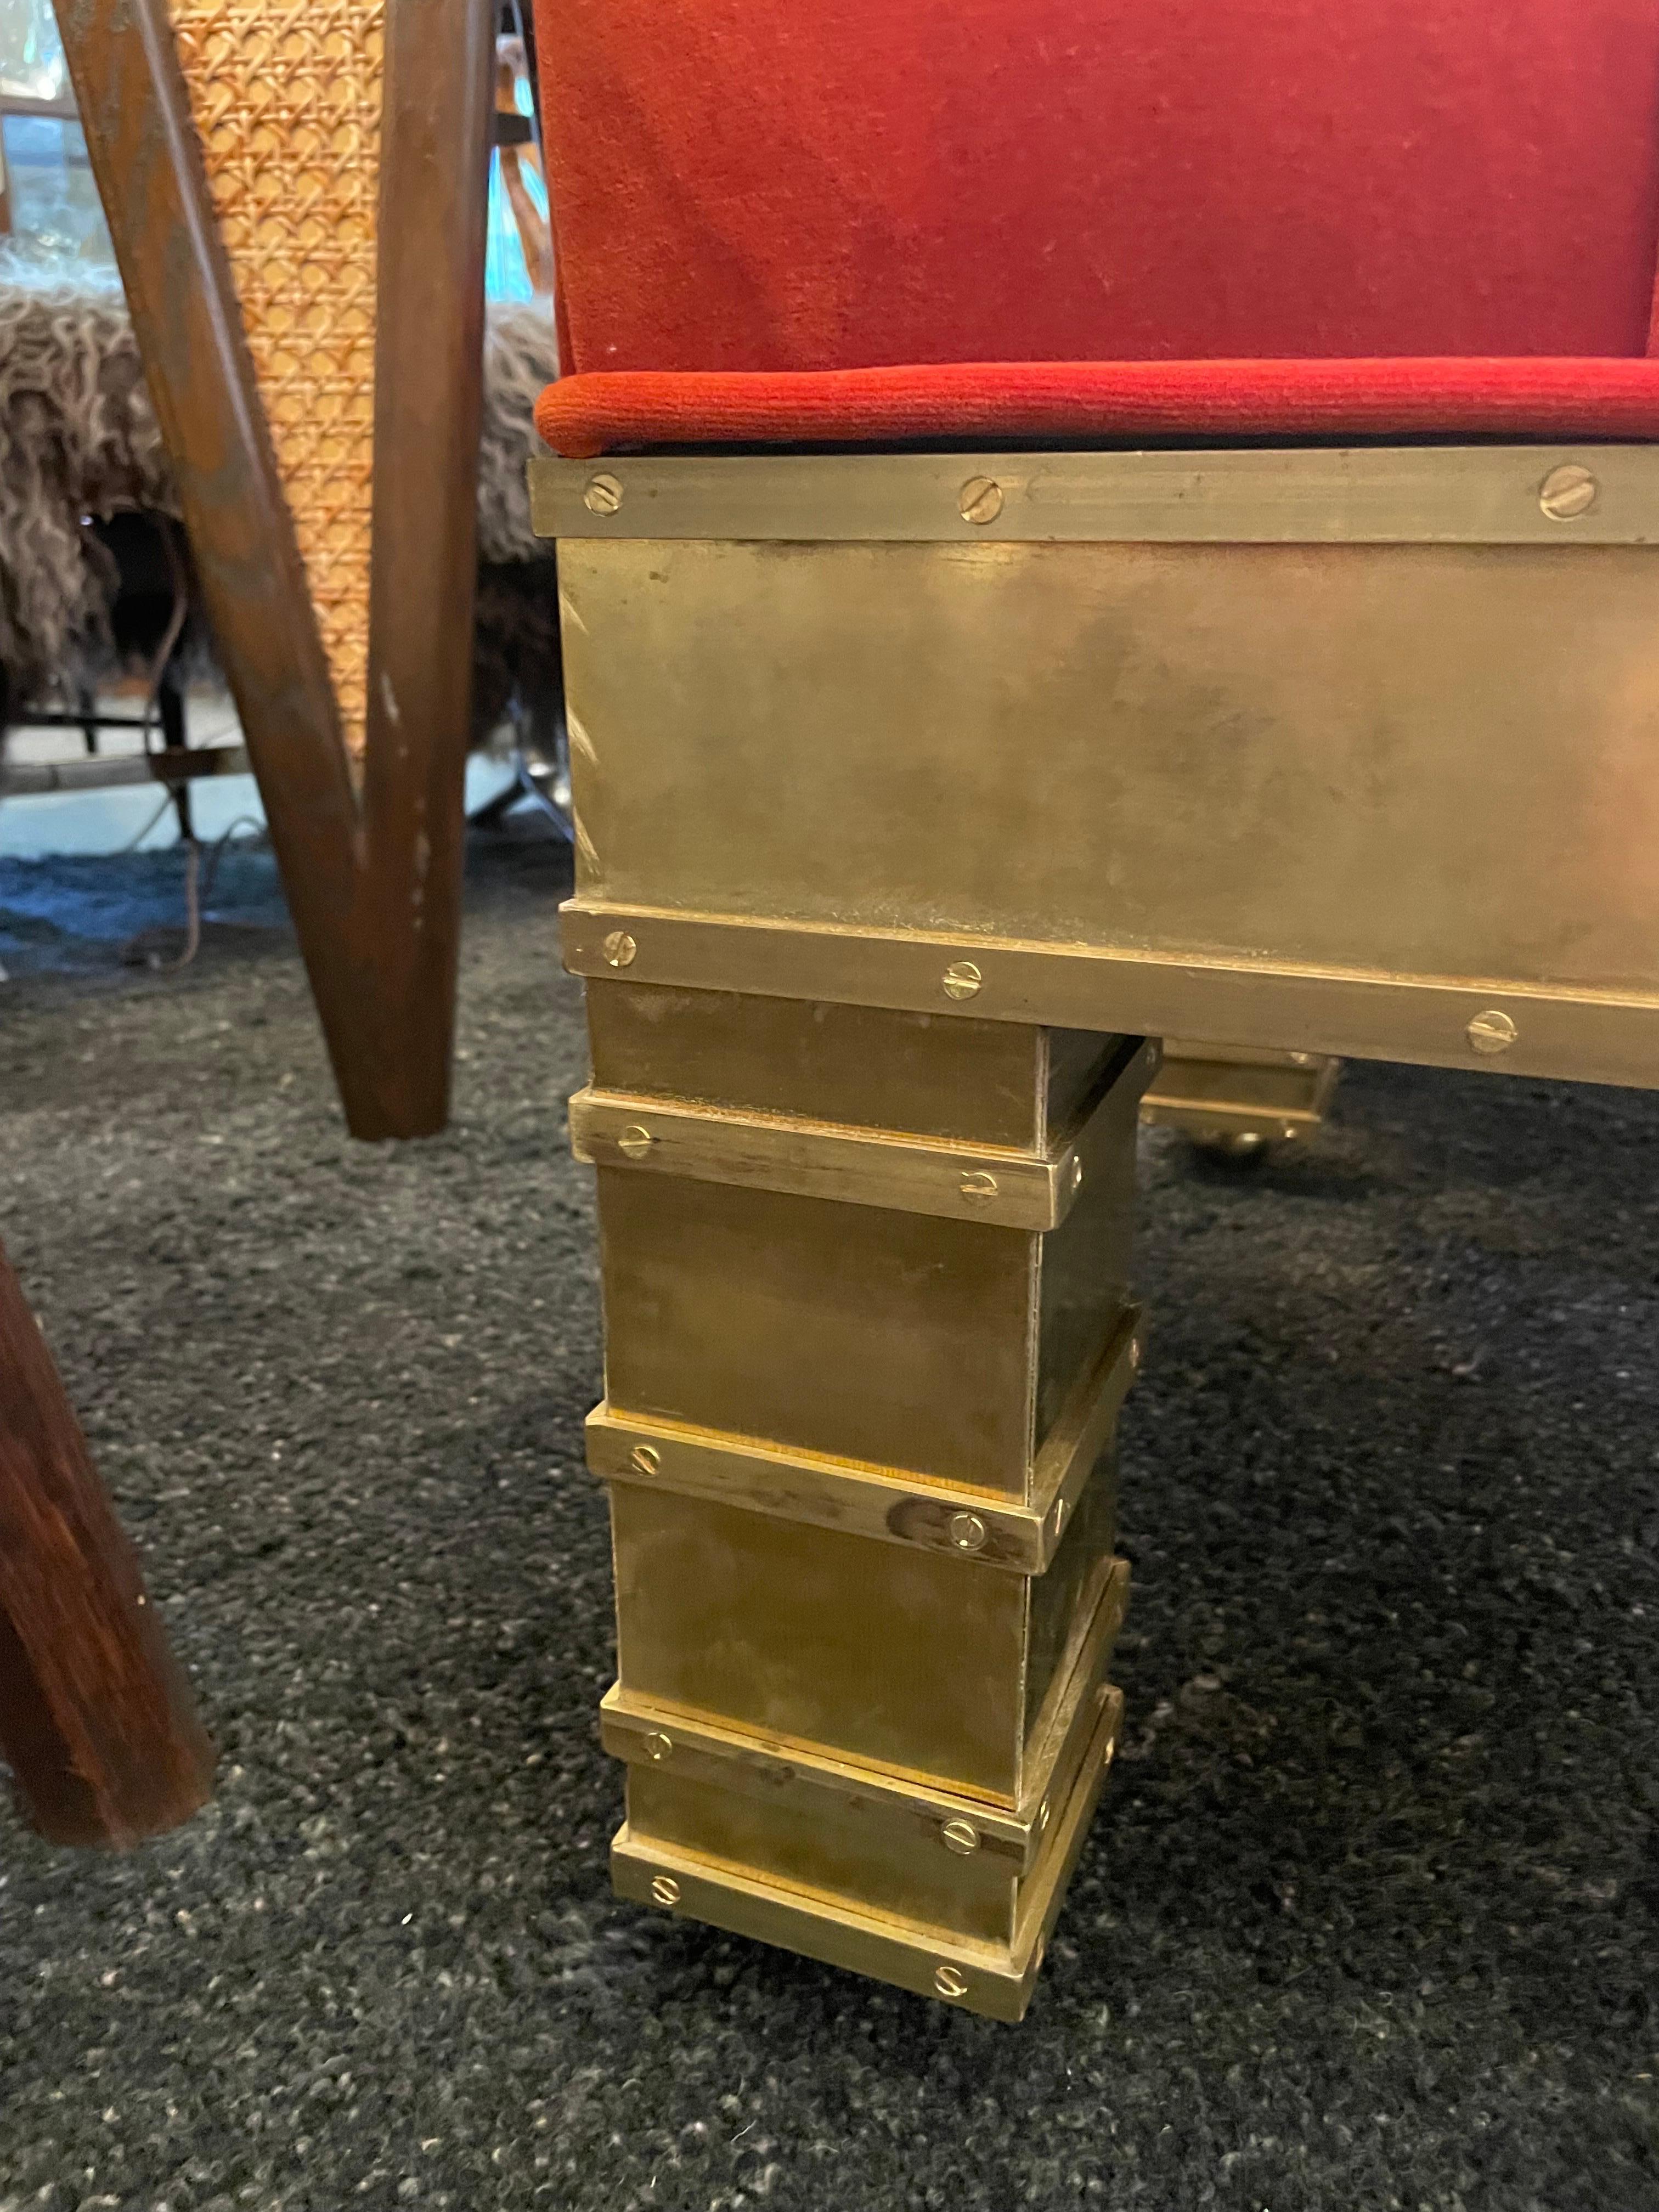 Italian Artisan Crafted Brass and Velvet Benches on Casters, '4 Avail' For Sale 7